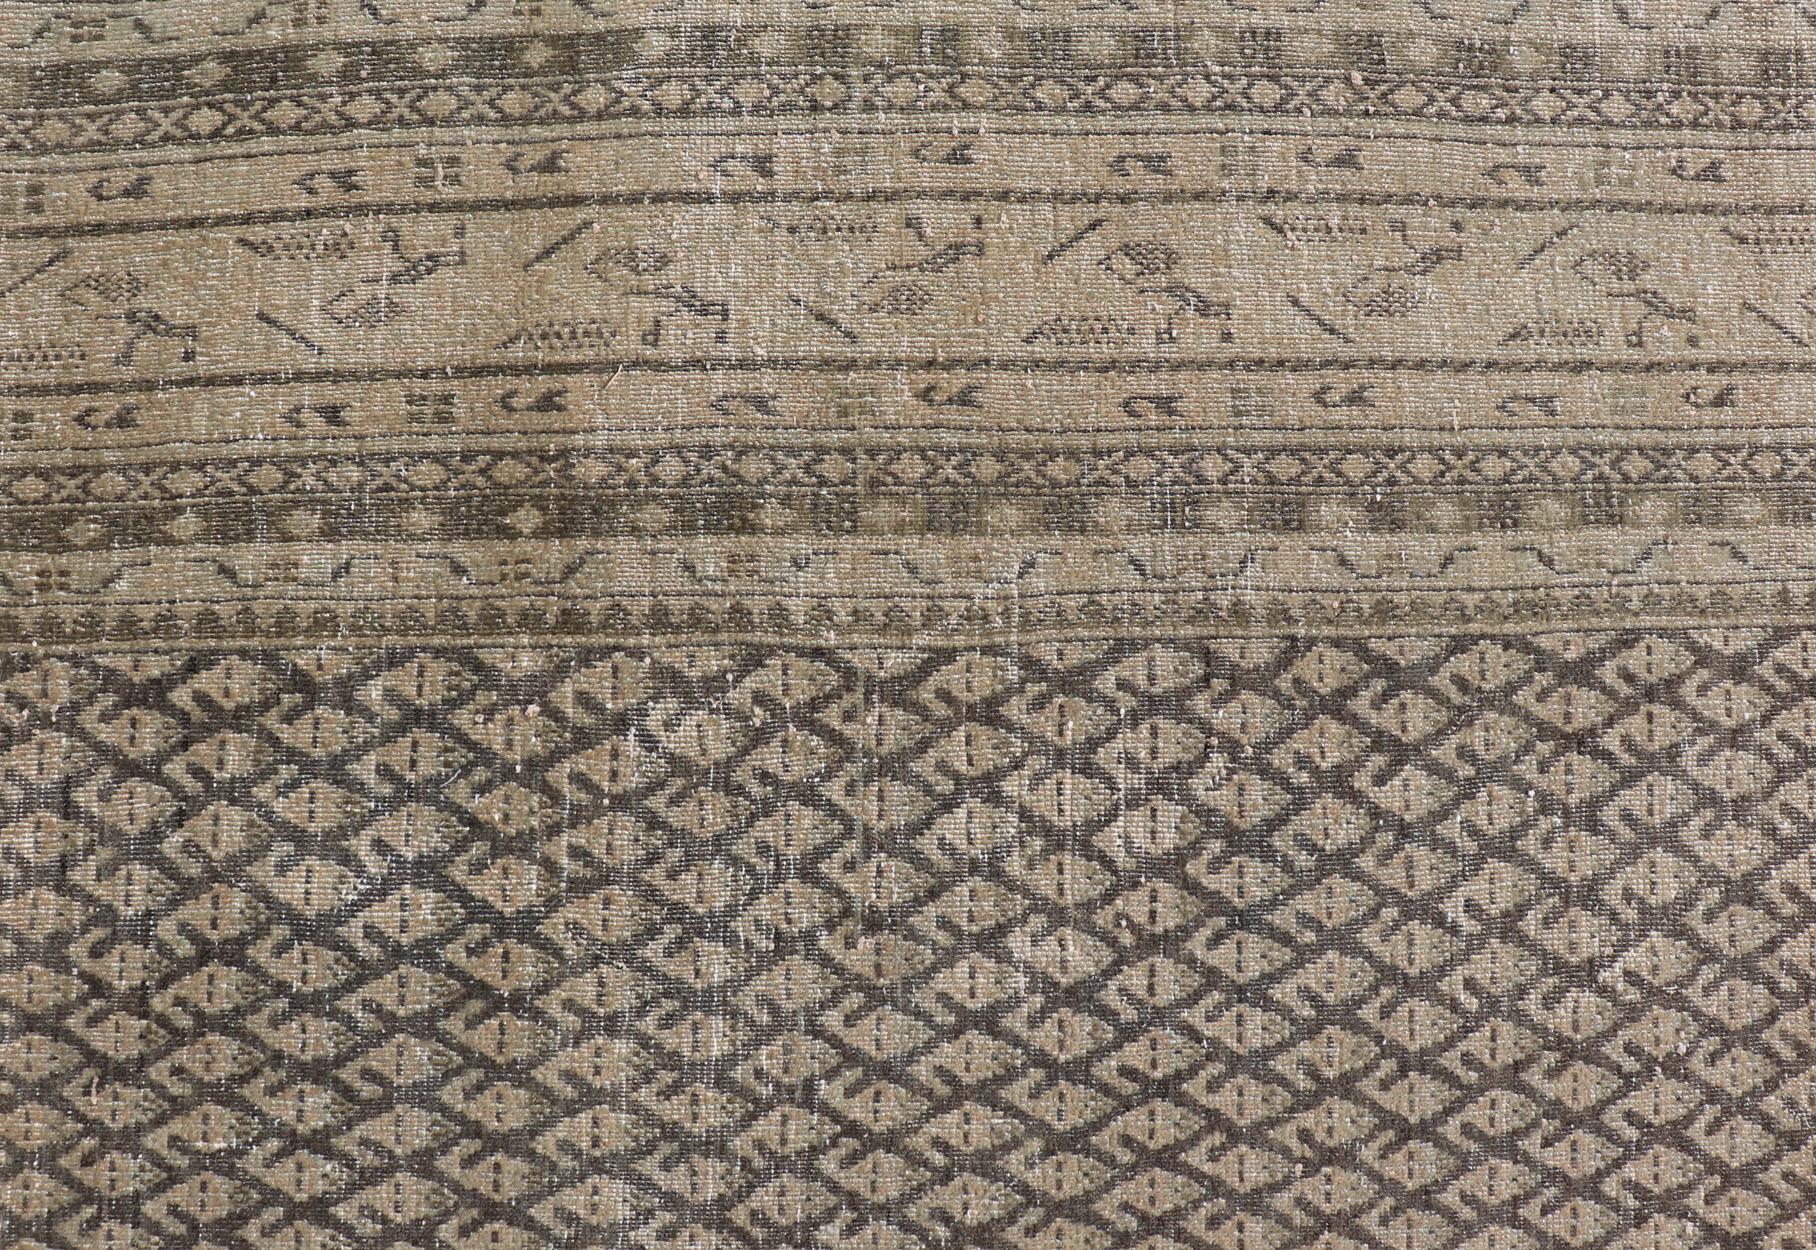 Wool Antique Persian Tabriz Rug with All-Over Design in Tones Of Brown, Tan, & Taupe For Sale